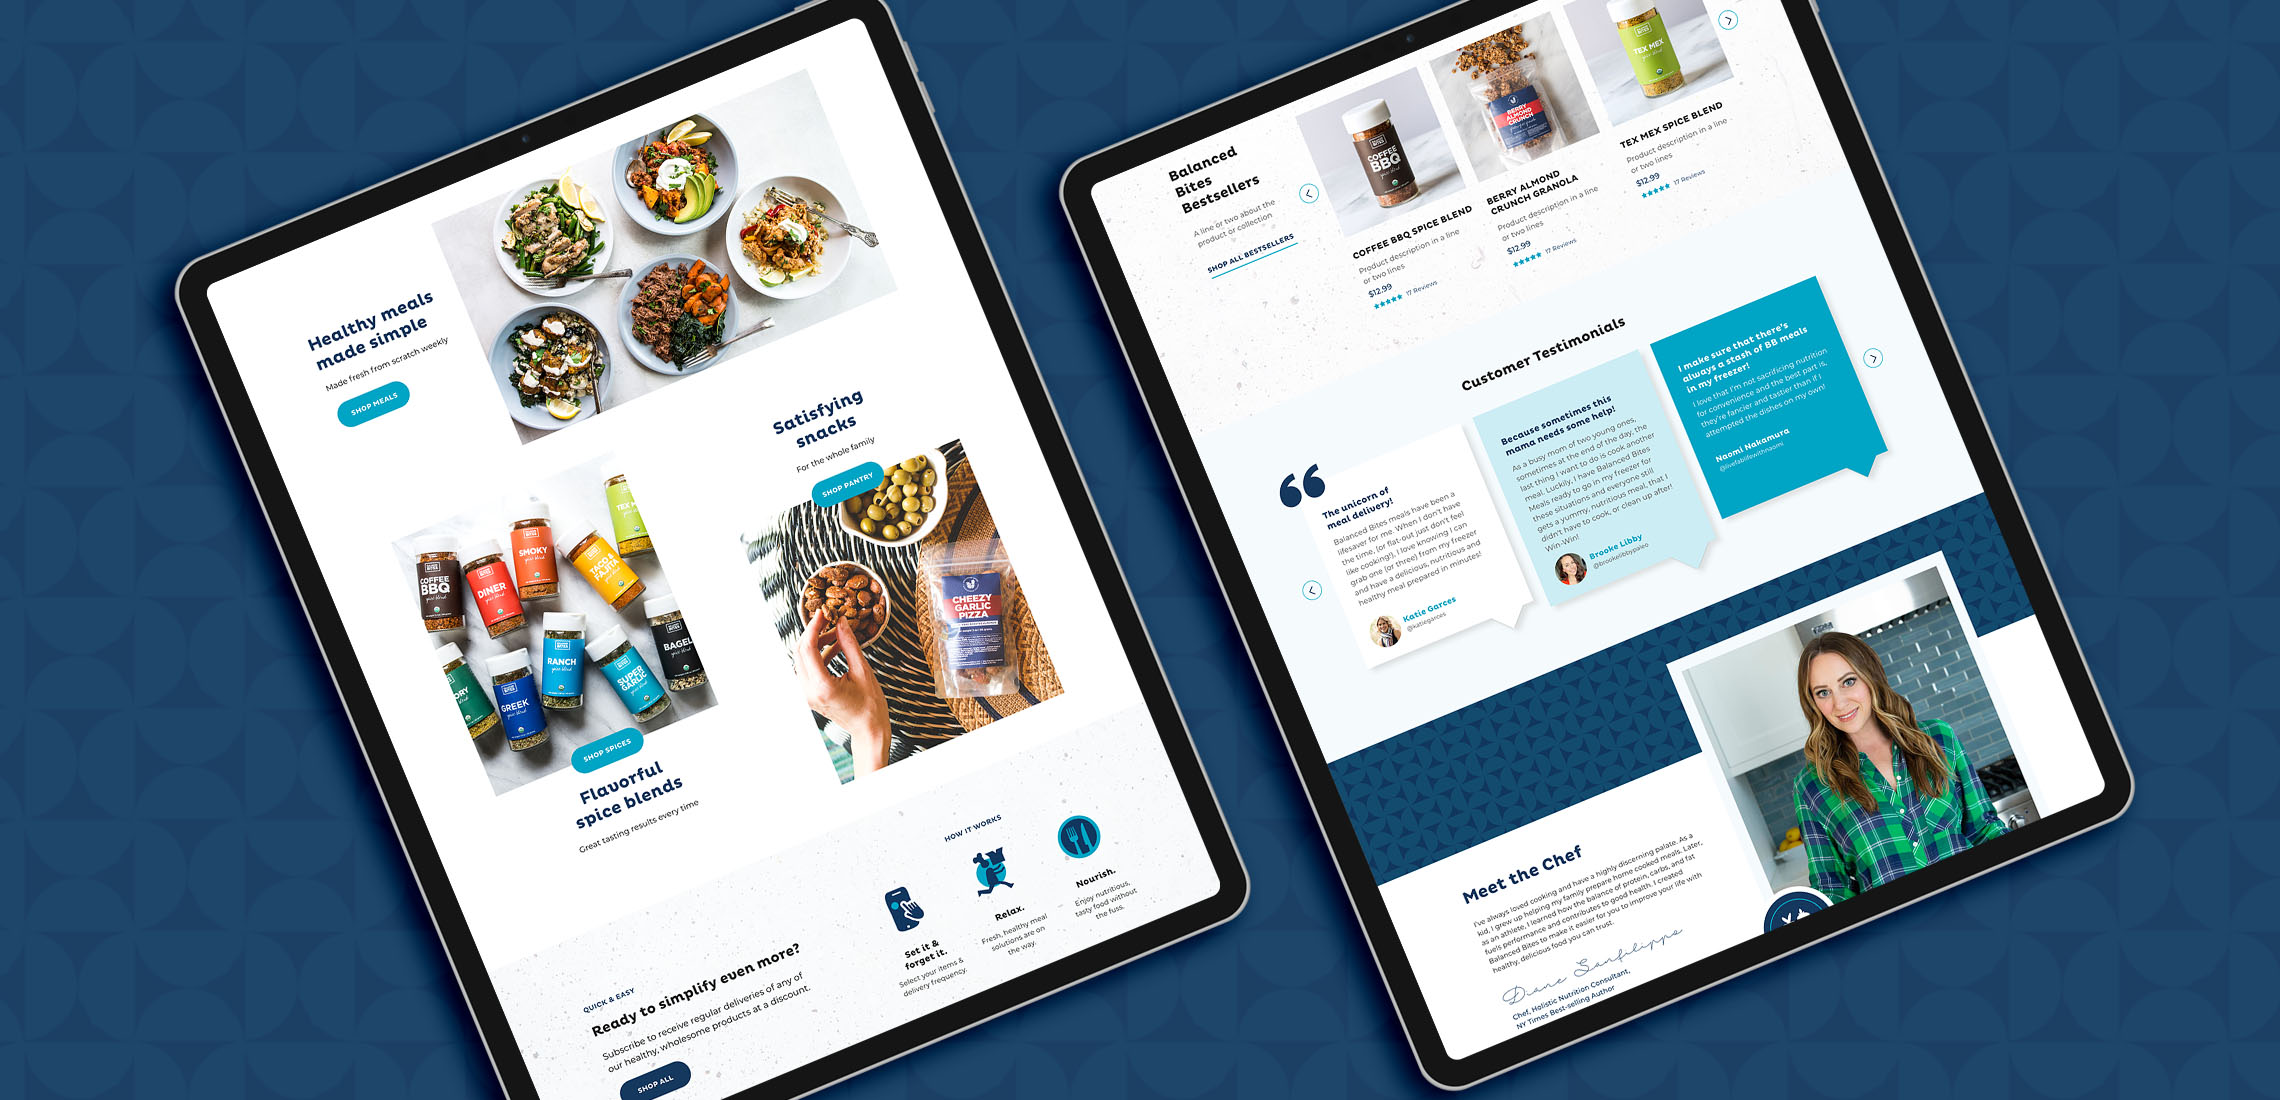 iPad screens showing the homepage of Balanced Bites - custom Shopify website redesign for an ecommerce meal delivery brand.